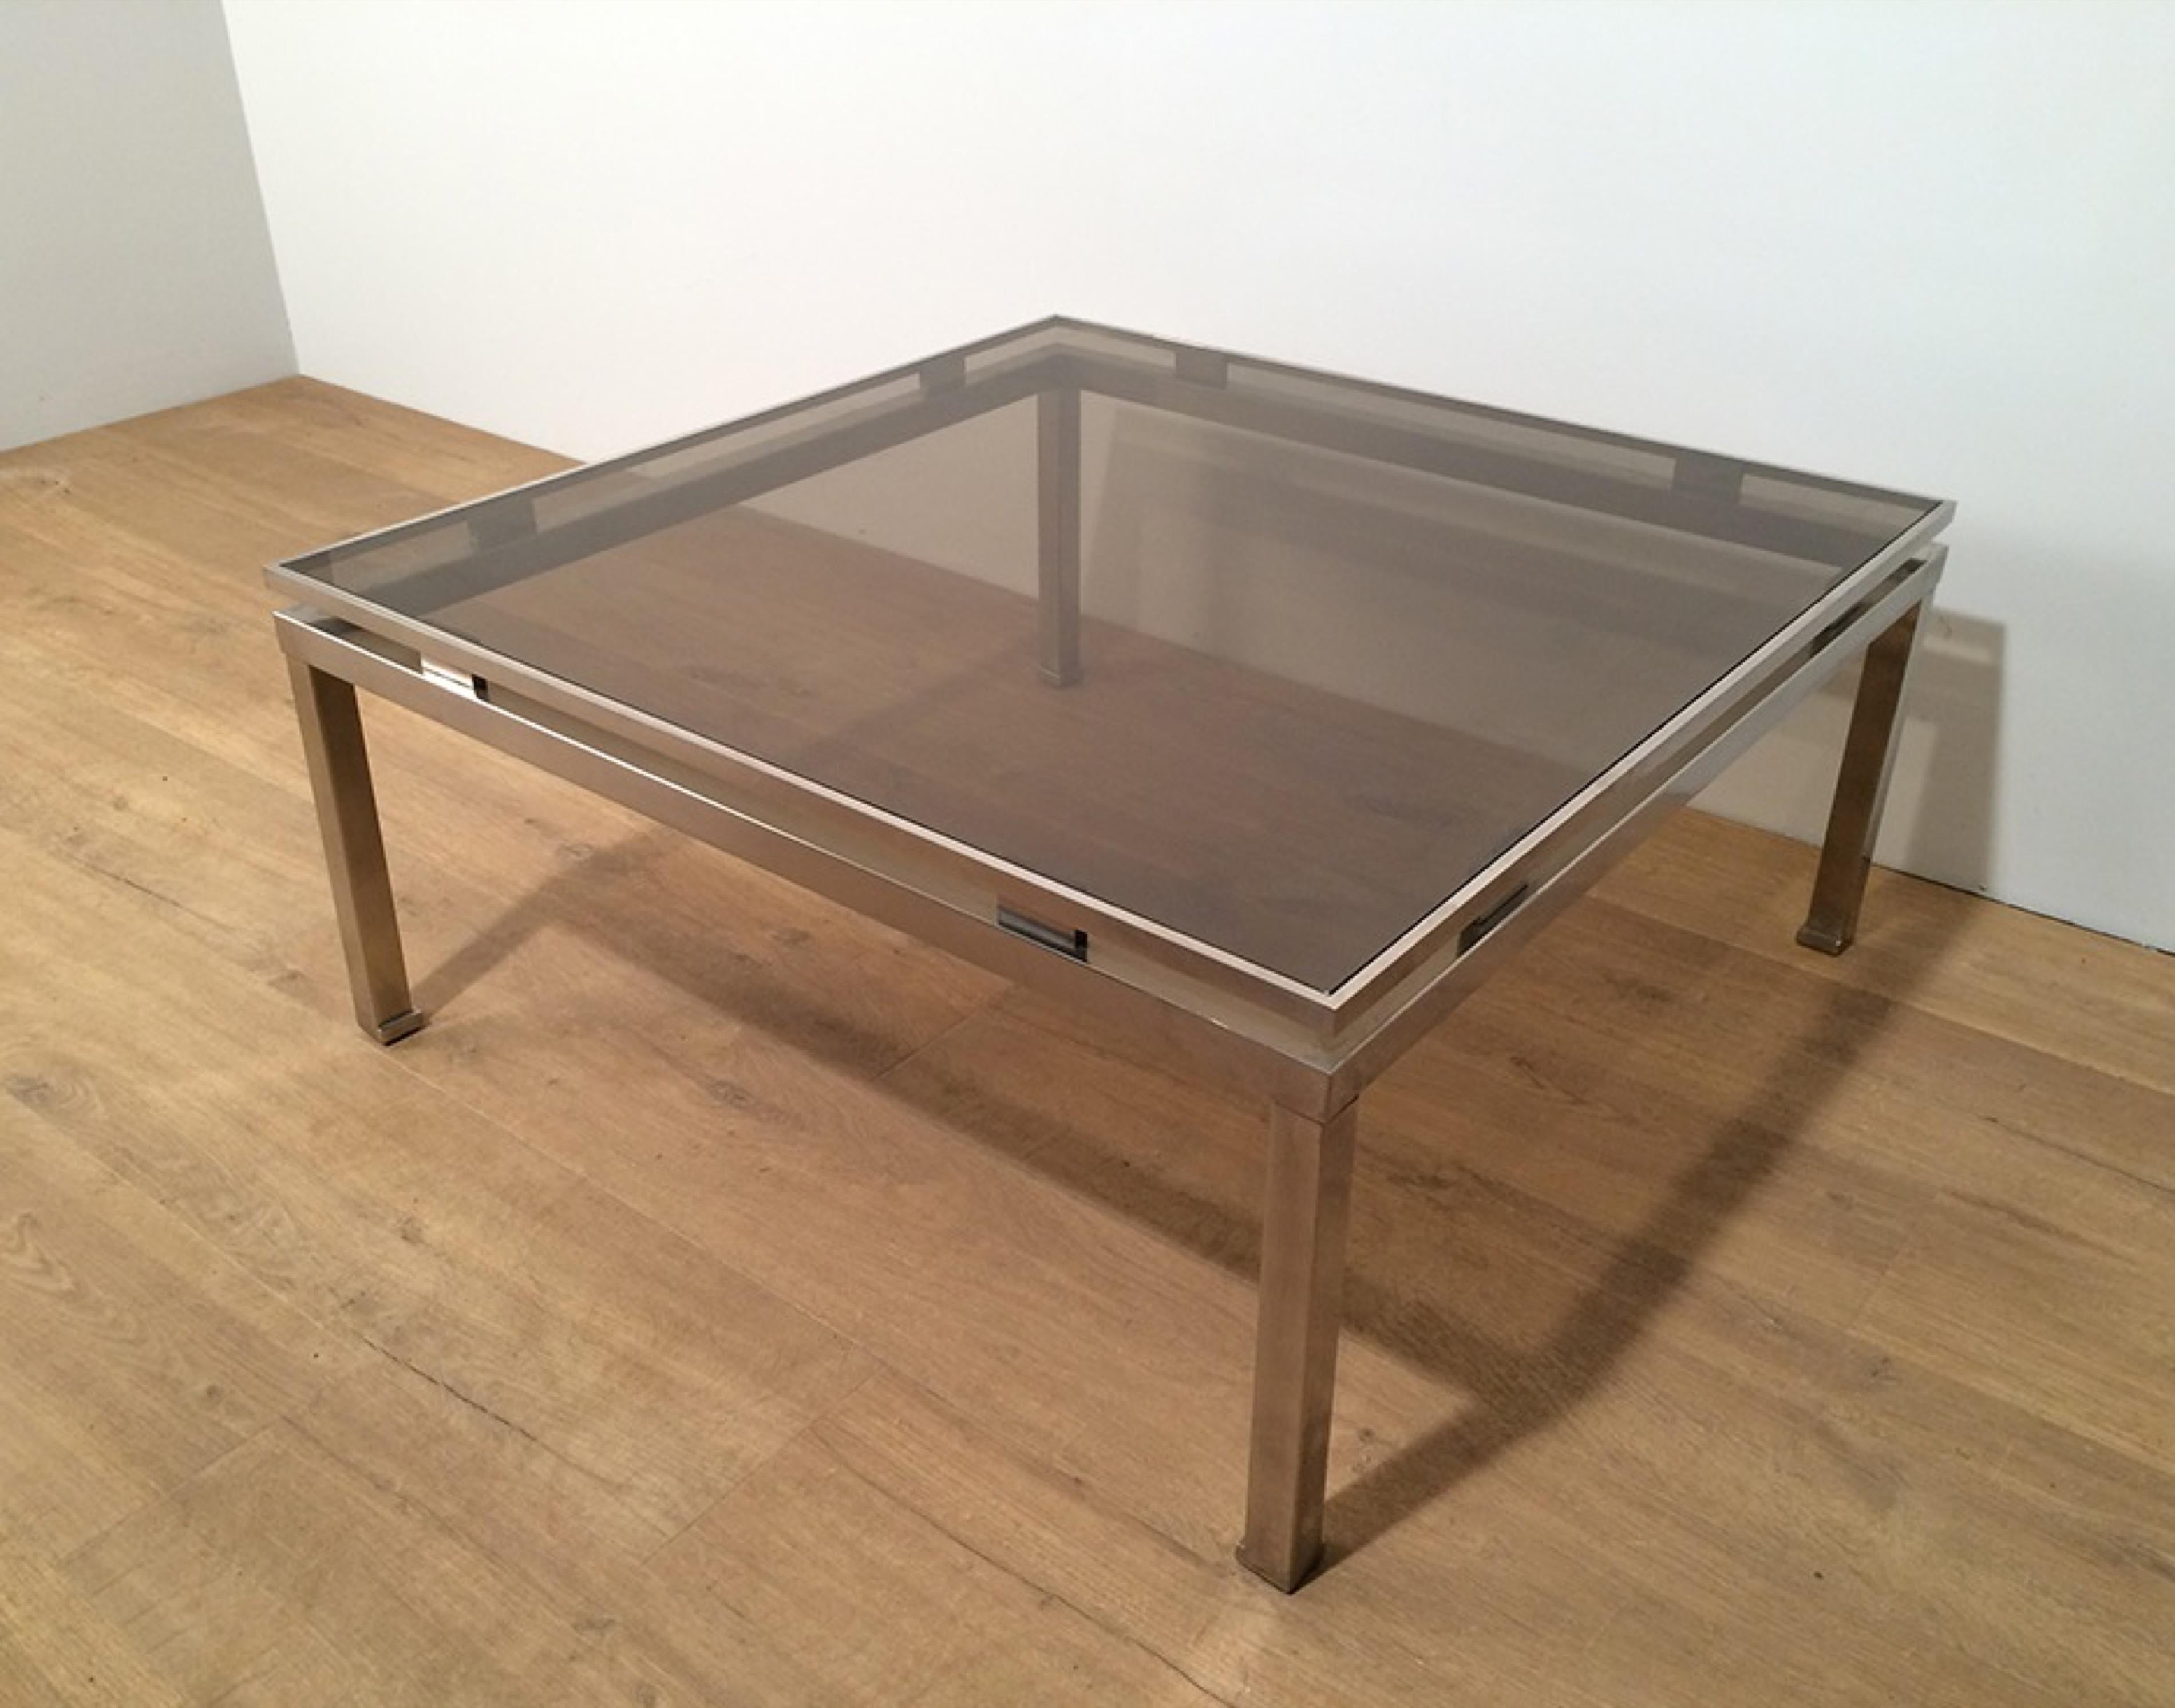 This nice square coffee table is made of brushed steel with a clear glass top shelf. This cocktail coffee table was made by famous French designer Guy Lefevre, circa 1970.